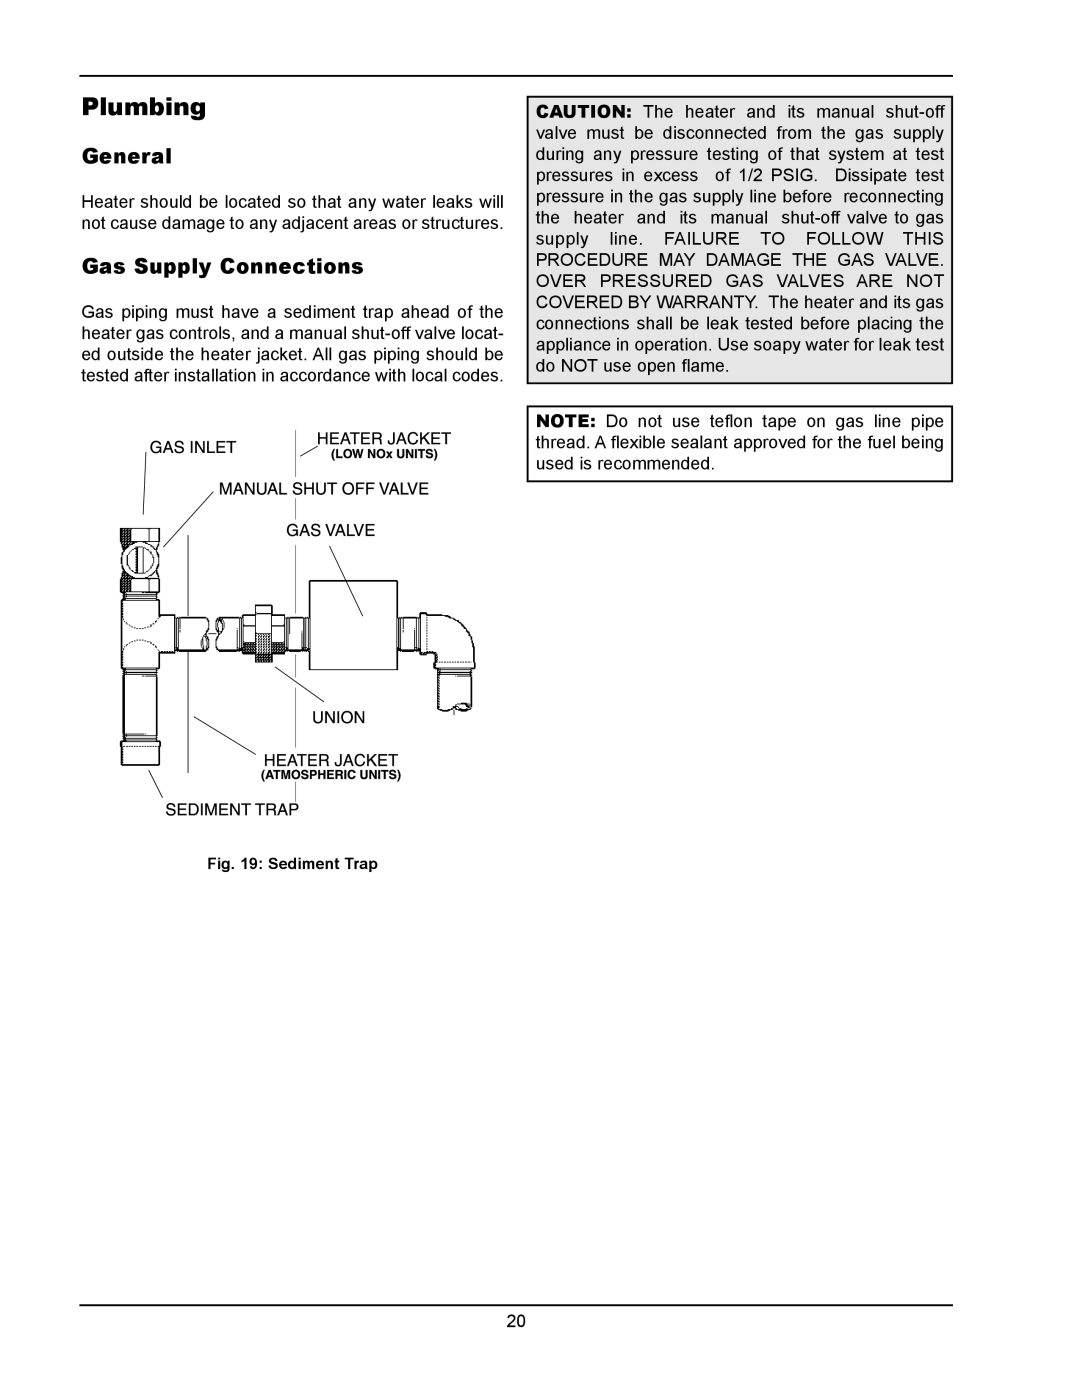 Raypak 1334001 operating instructions Plumbing, General, Gas Supply Connections 